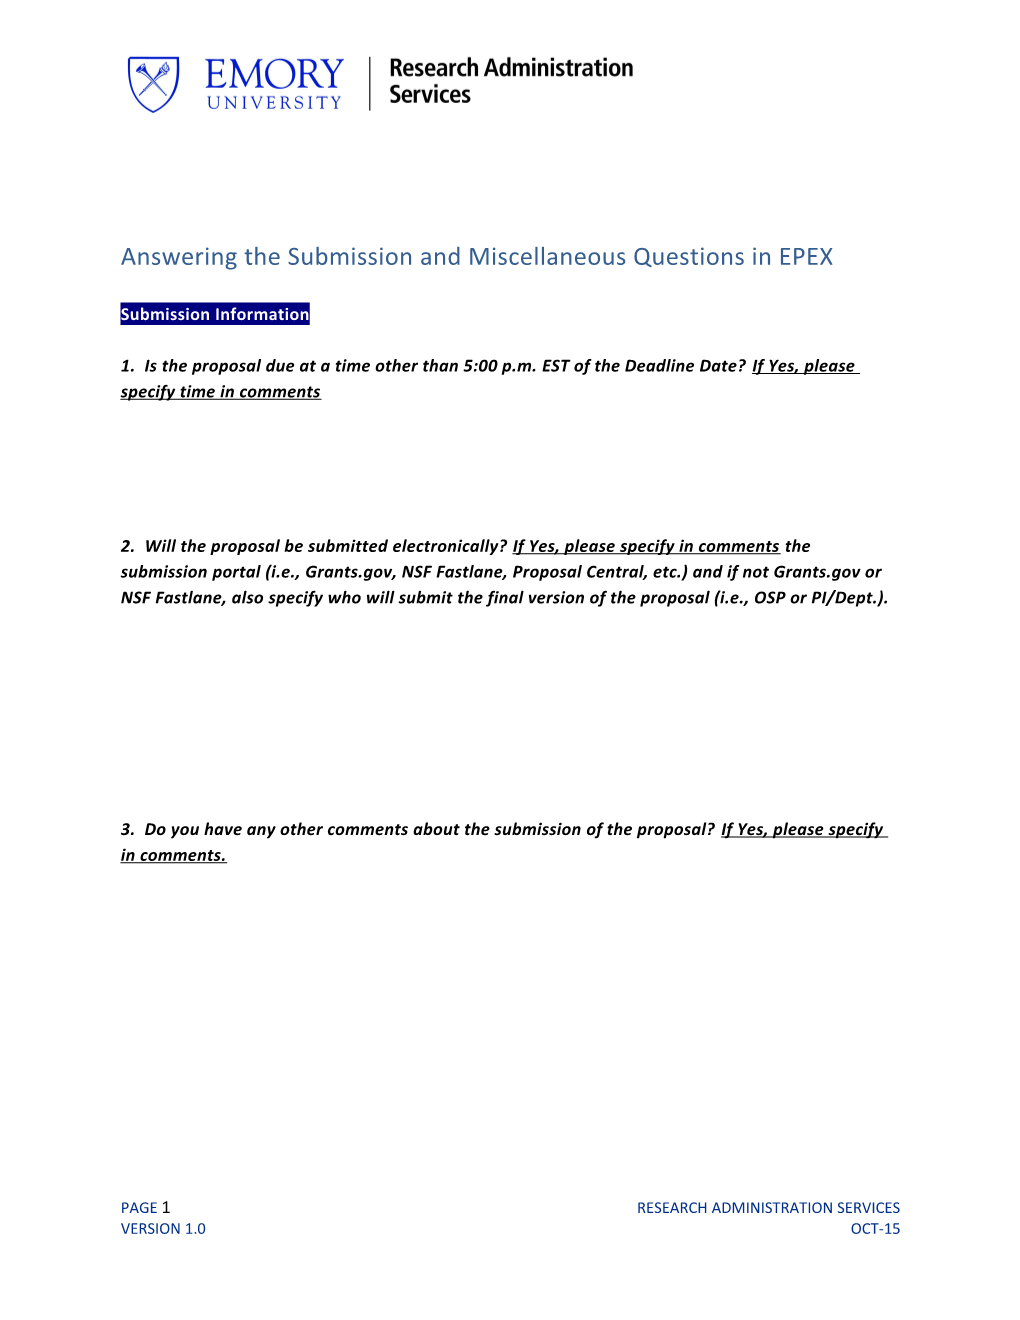 Answering Submission and Miscellaneous Questions in Epex